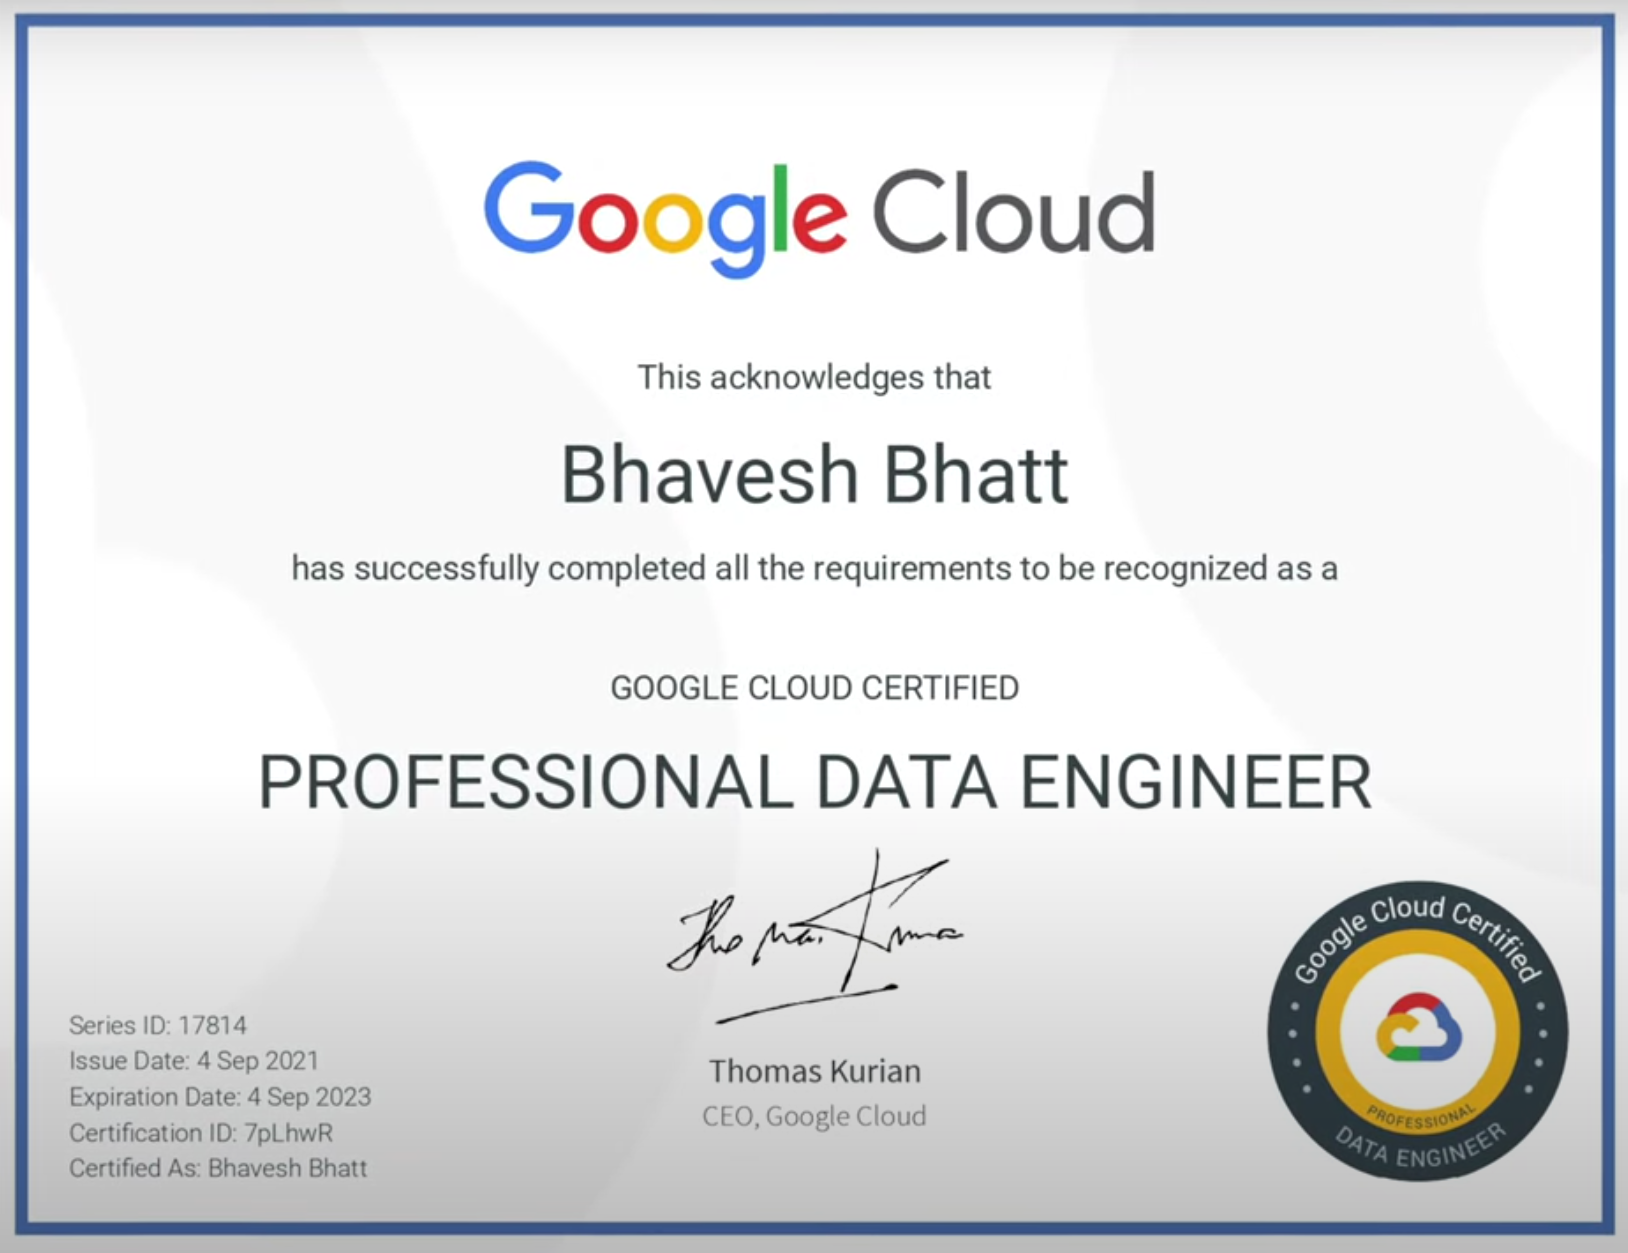 Image of Bhavesh's Google Cloud certificate